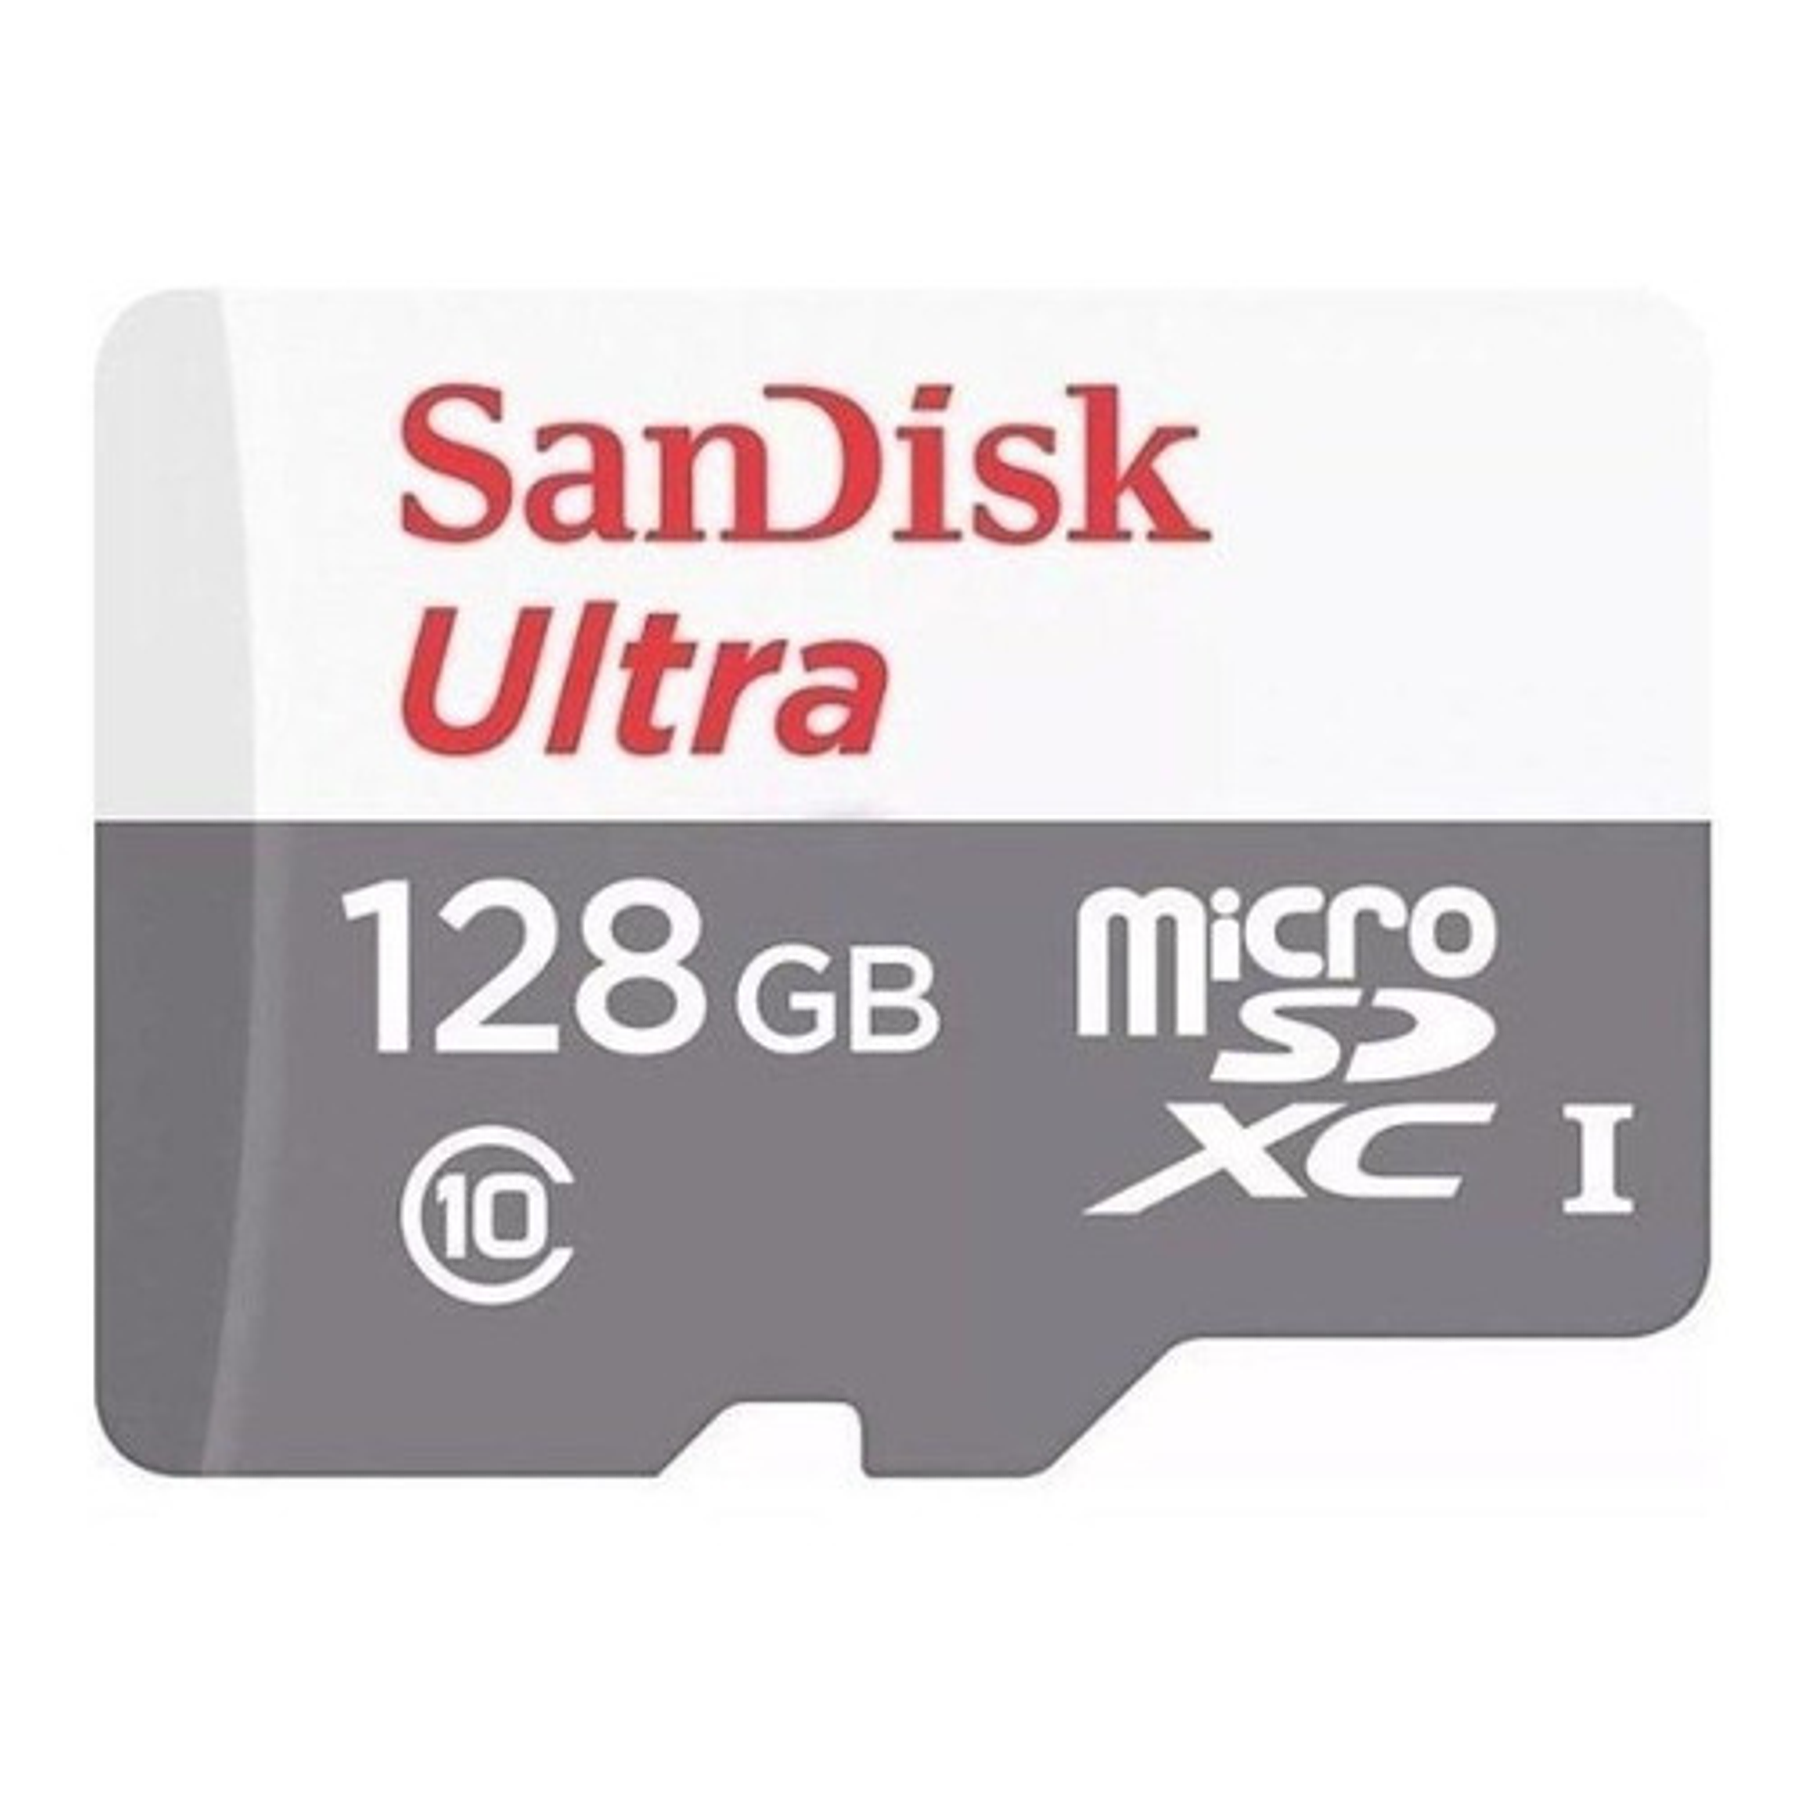 Sandisk Micro SD CON/ADP CLAS 10 128gb 80Mb/48Mb 